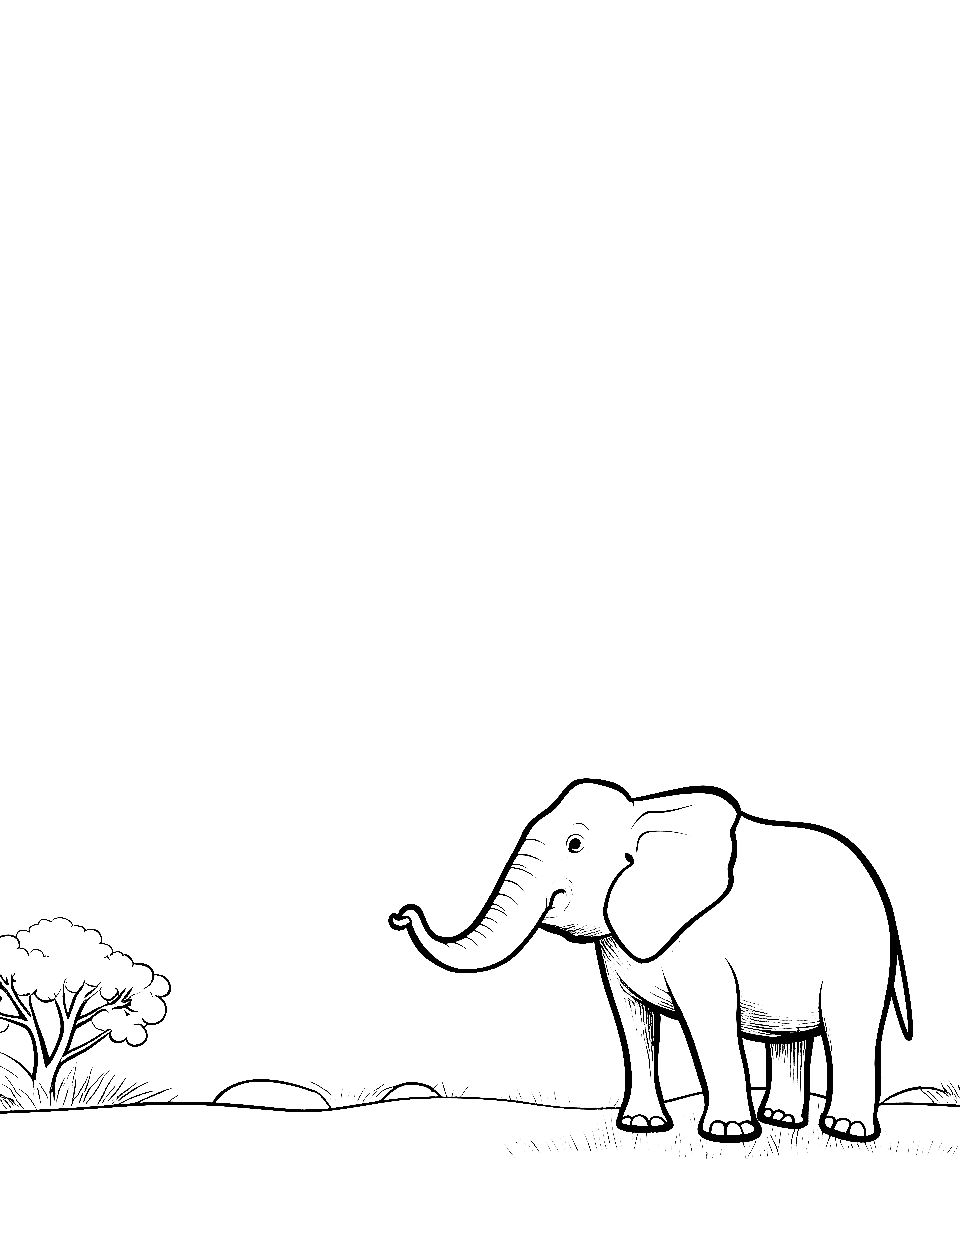 Small Elephant in Vast Plains Coloring Page - A tiny elephant silhouette against a large empty savannah.